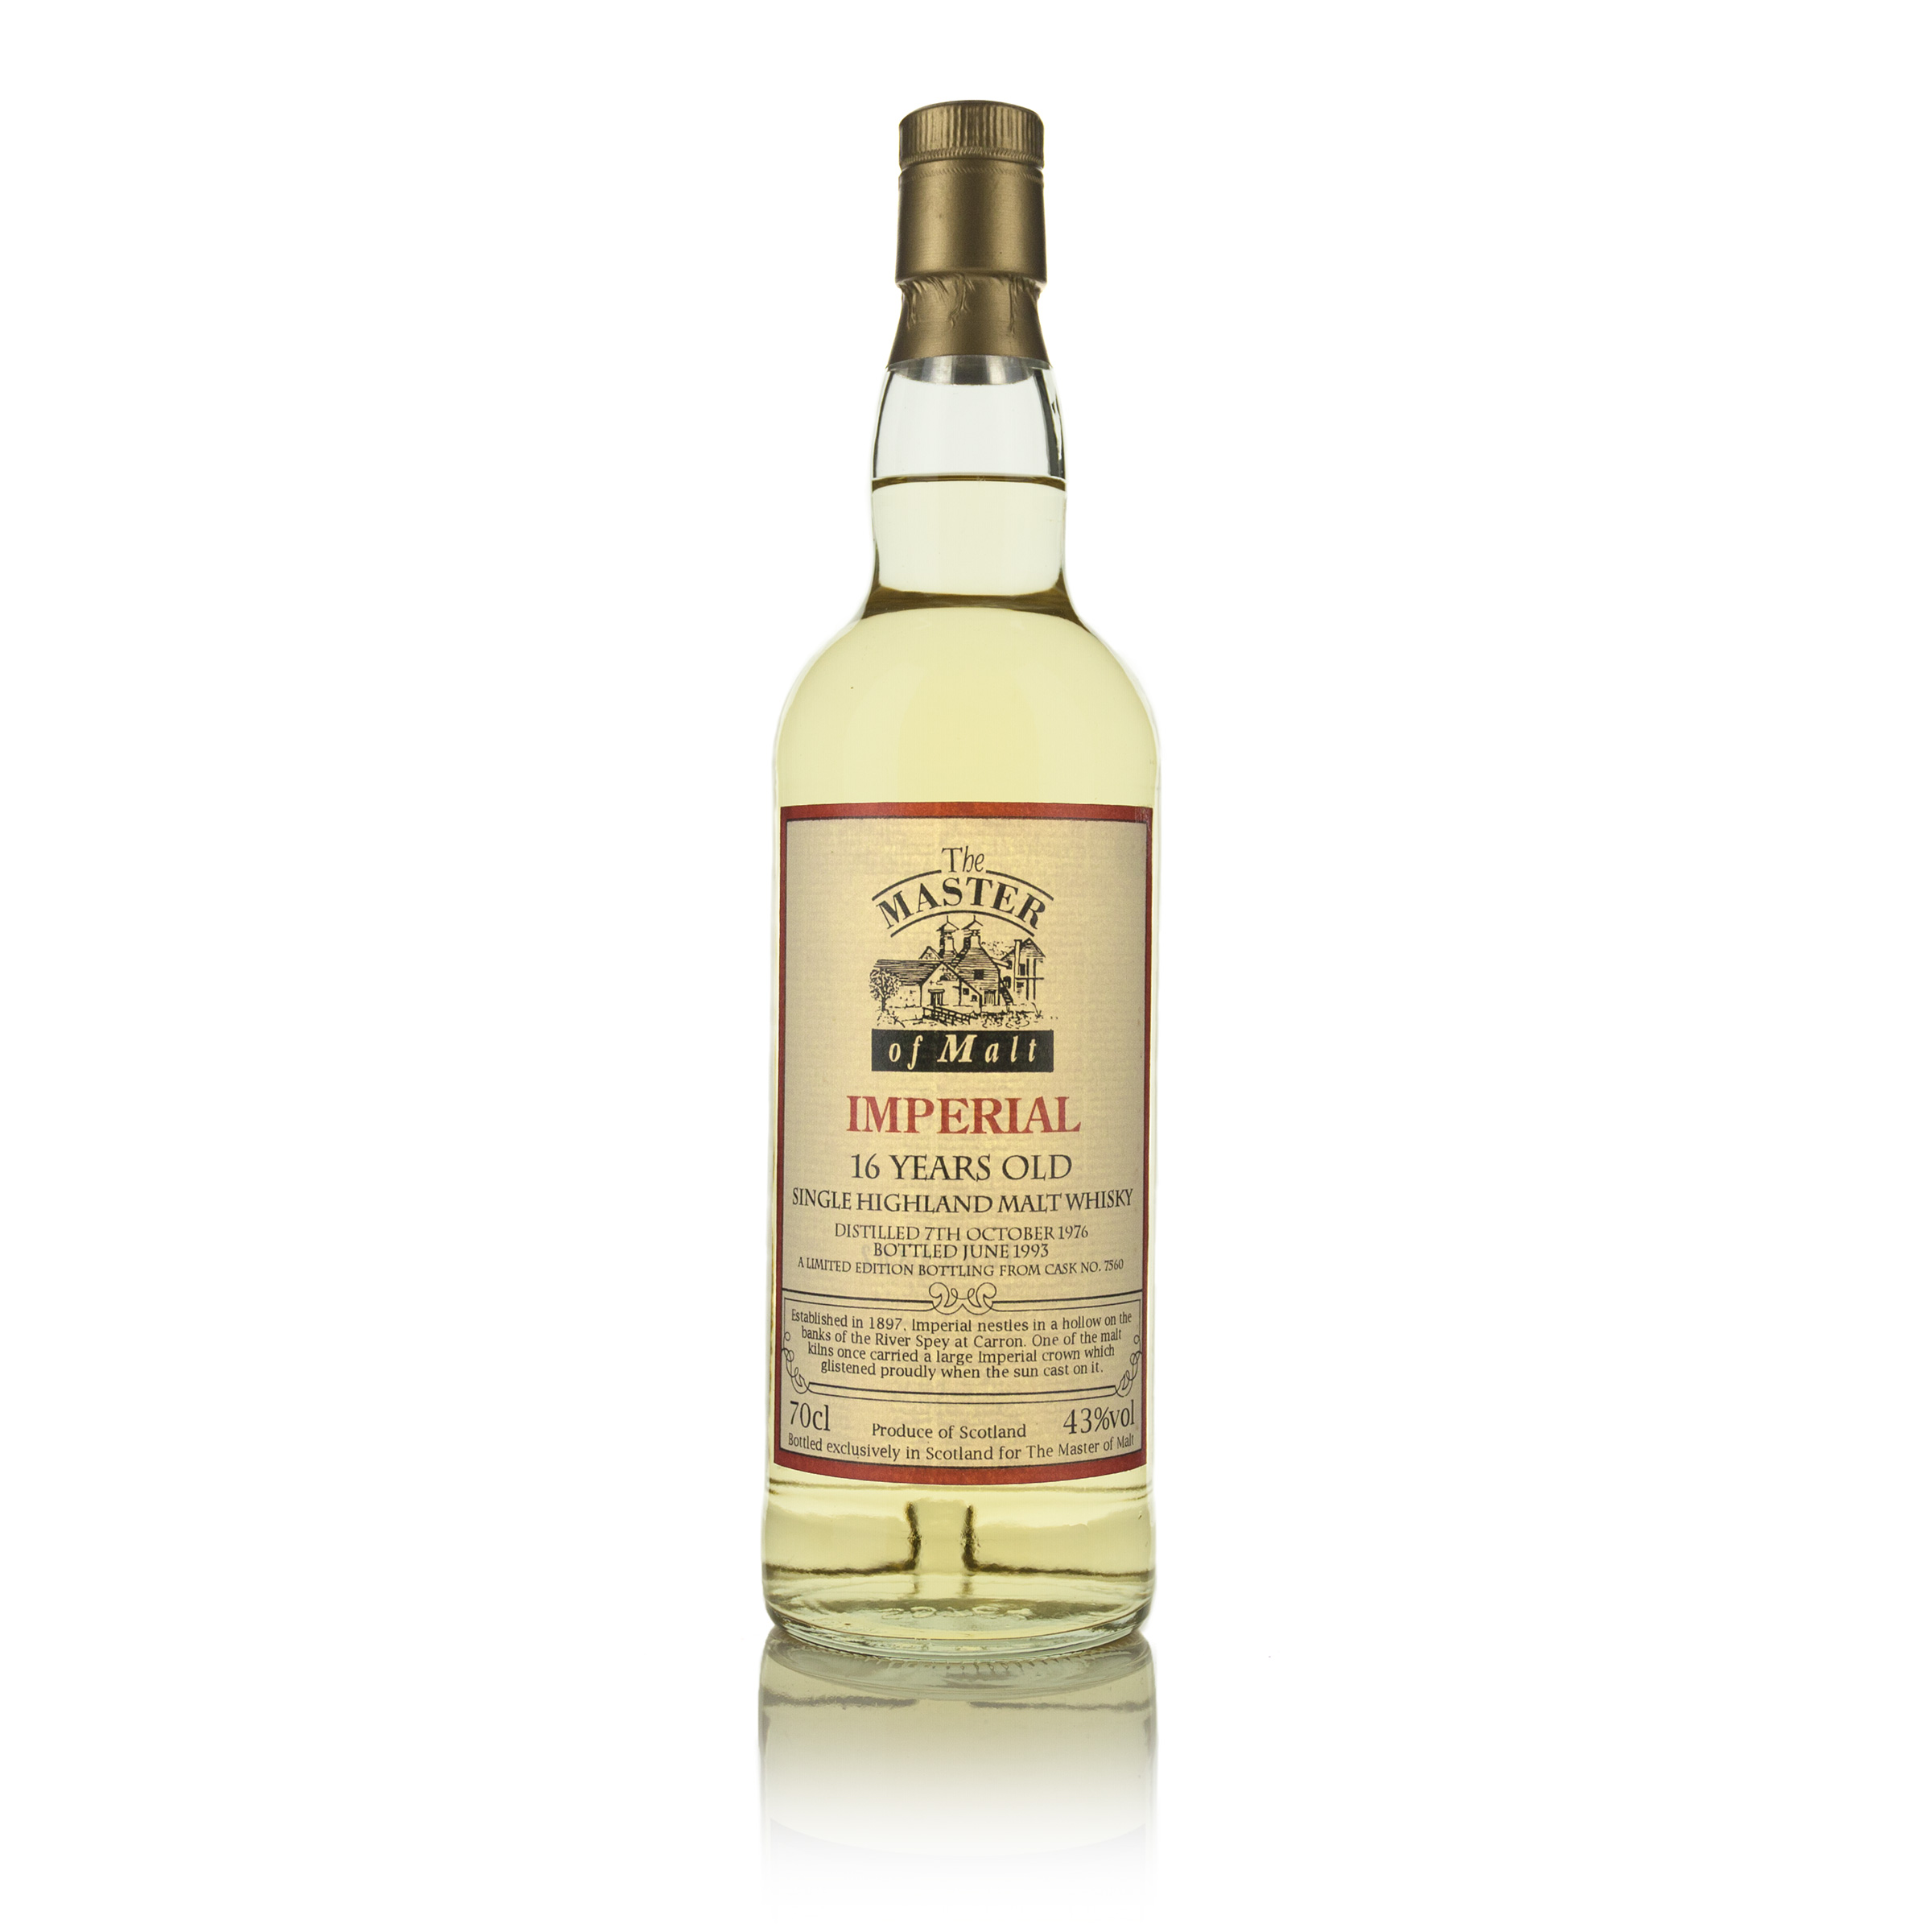 IMPERIAL SINGLE HIGHLAND MALT WHISKY 16 YEARS (ONE 70 CL)